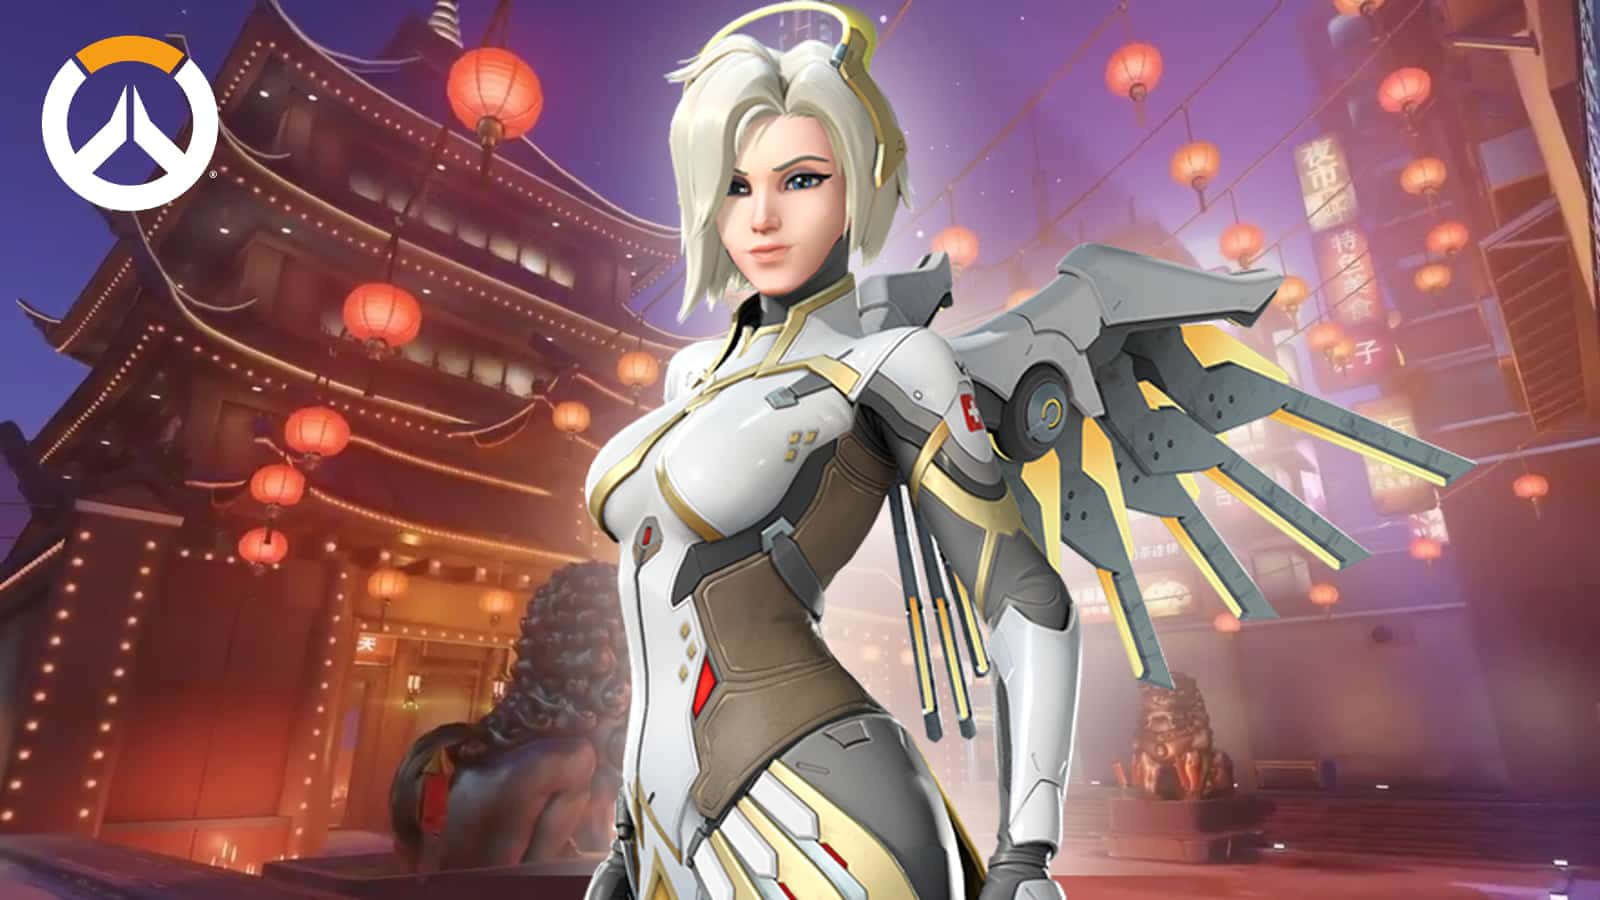 Overwatch Mercy ready for action Wallpaper